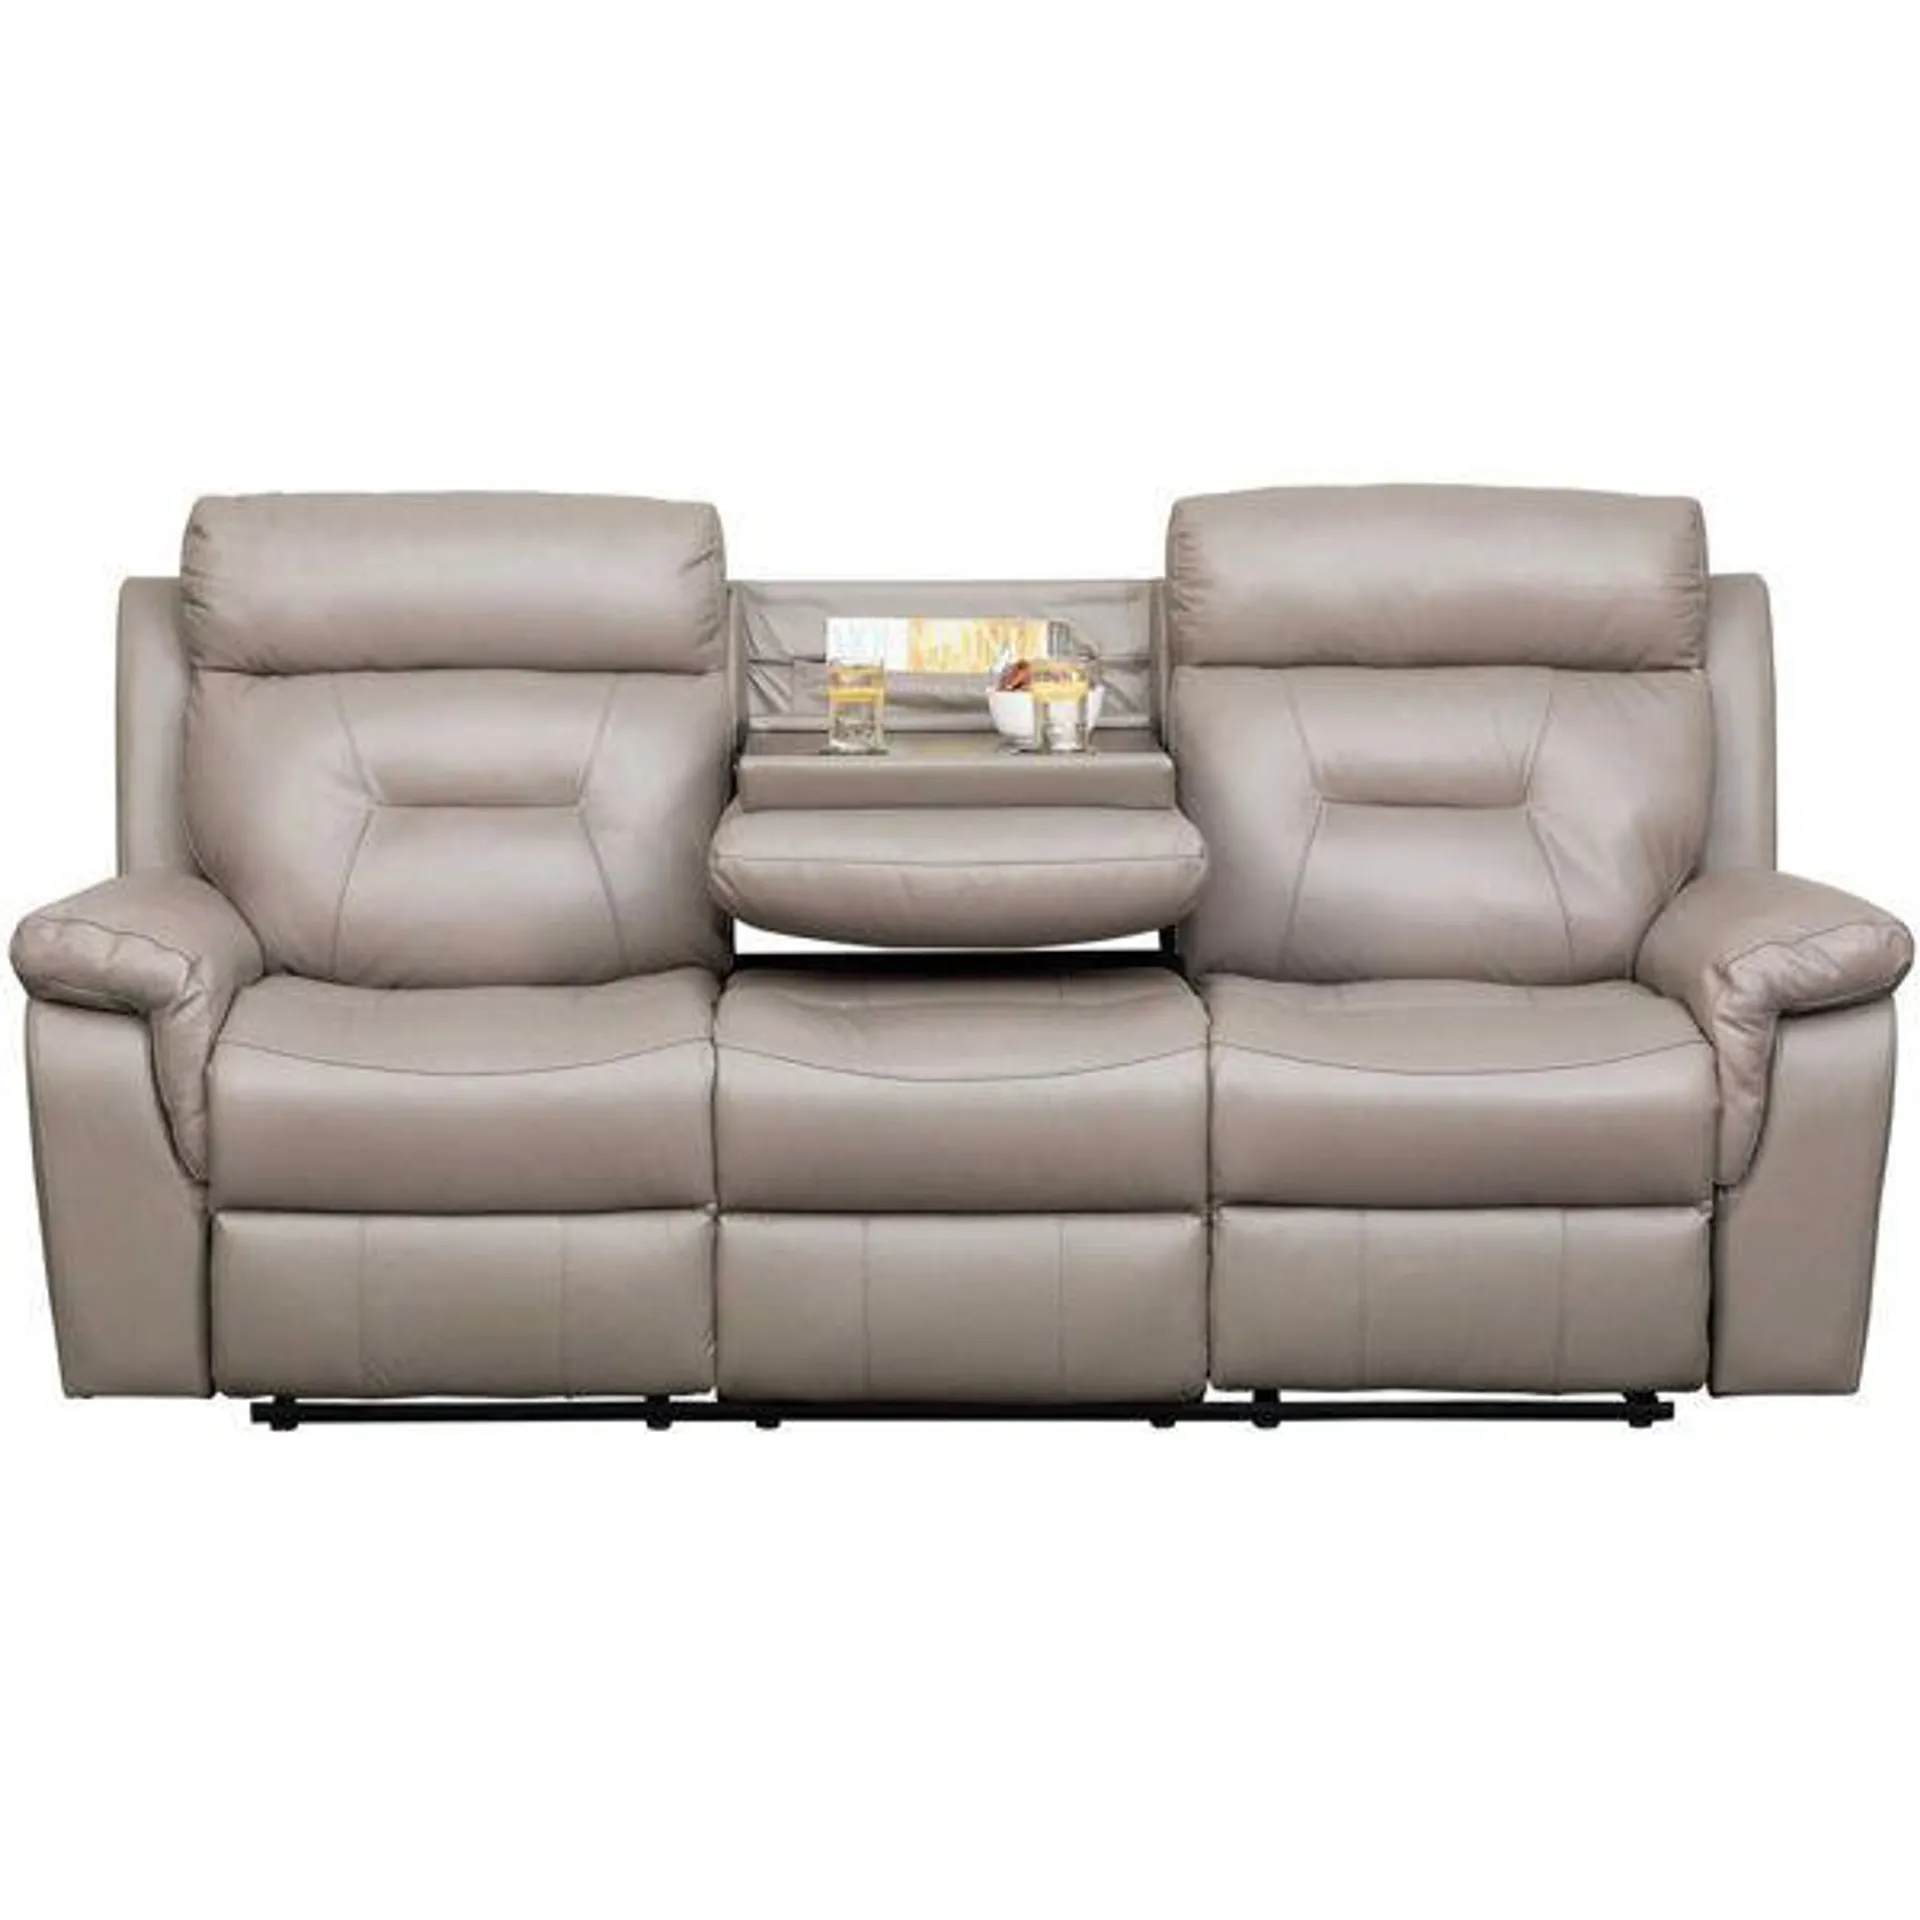 Watson Light Gray Leather Reclining Sofa with DDT